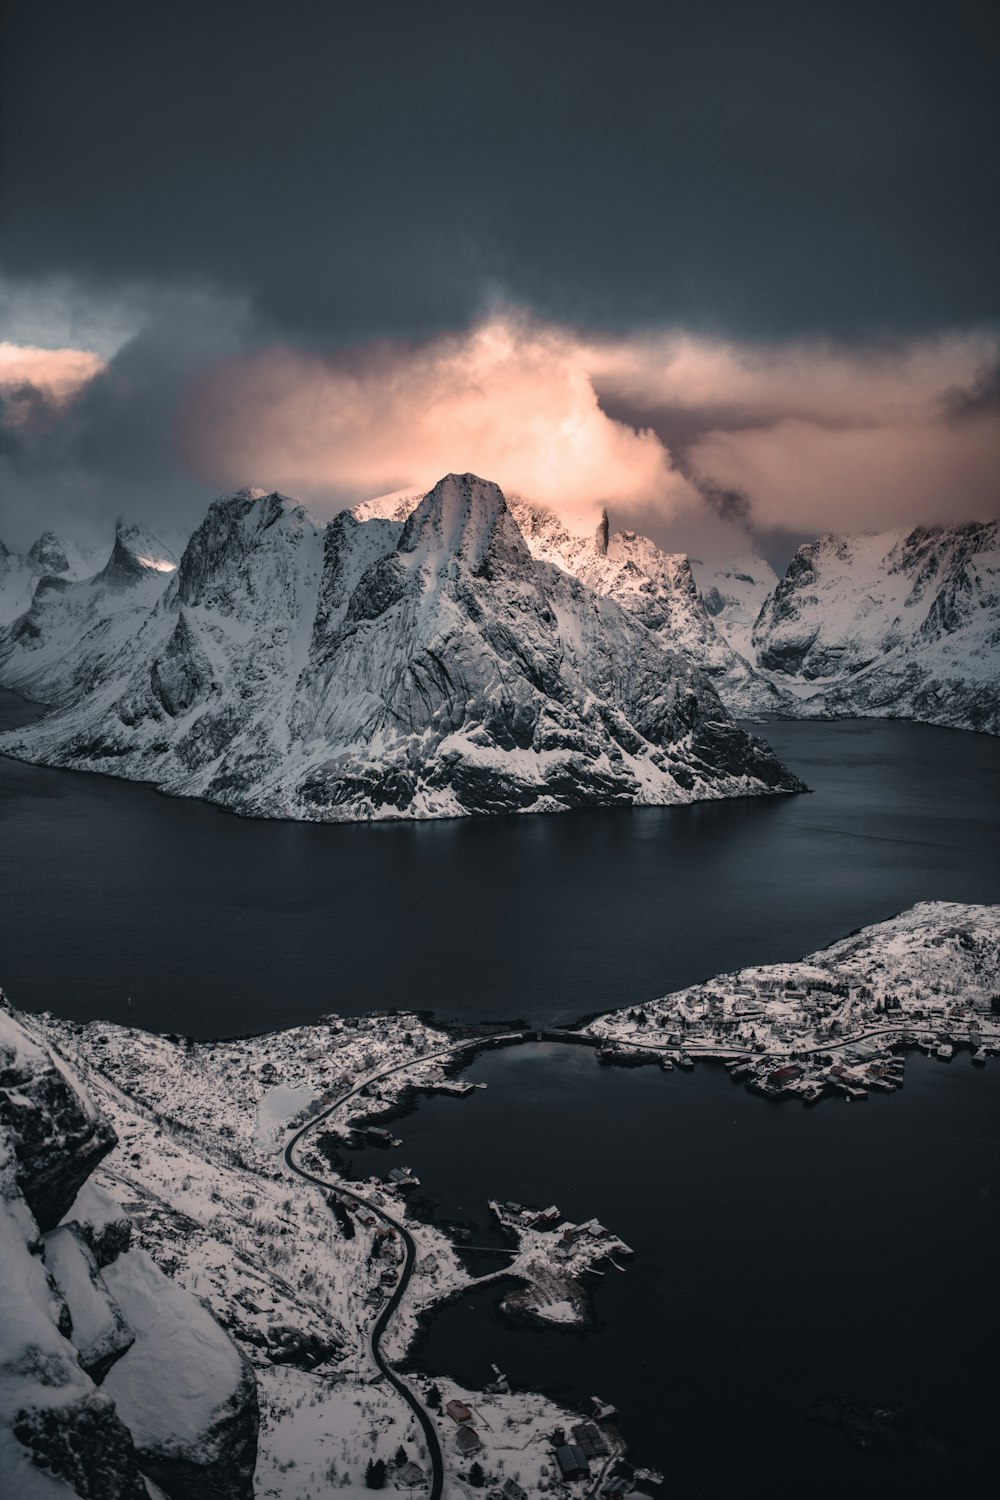 snow covered mountain near body of water during sunset